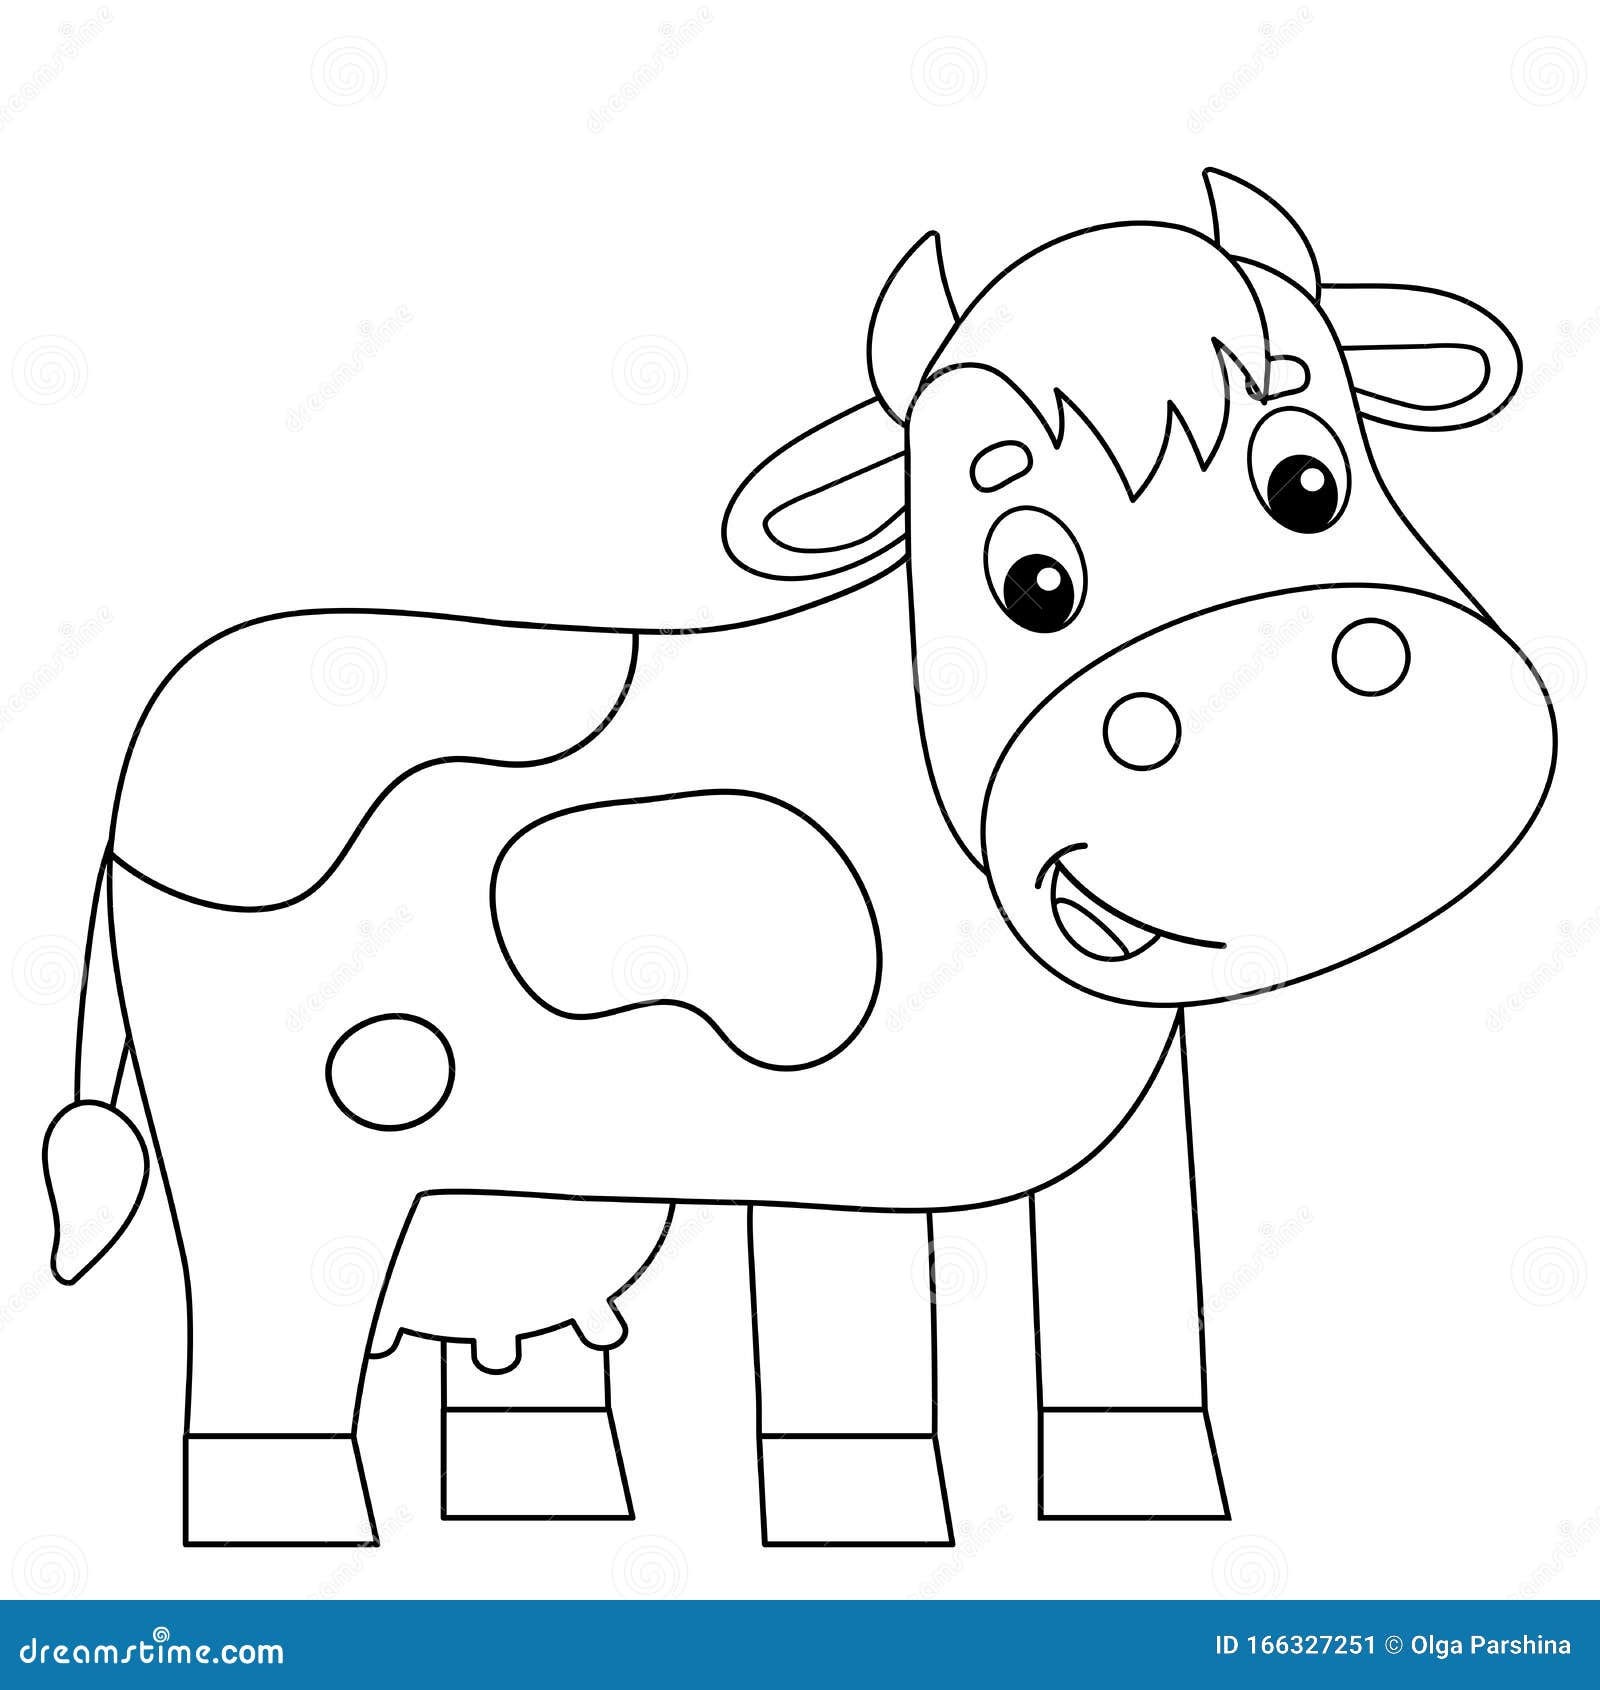 drawing-illustration-farm-animals-coloring-pages-for-kids-digital